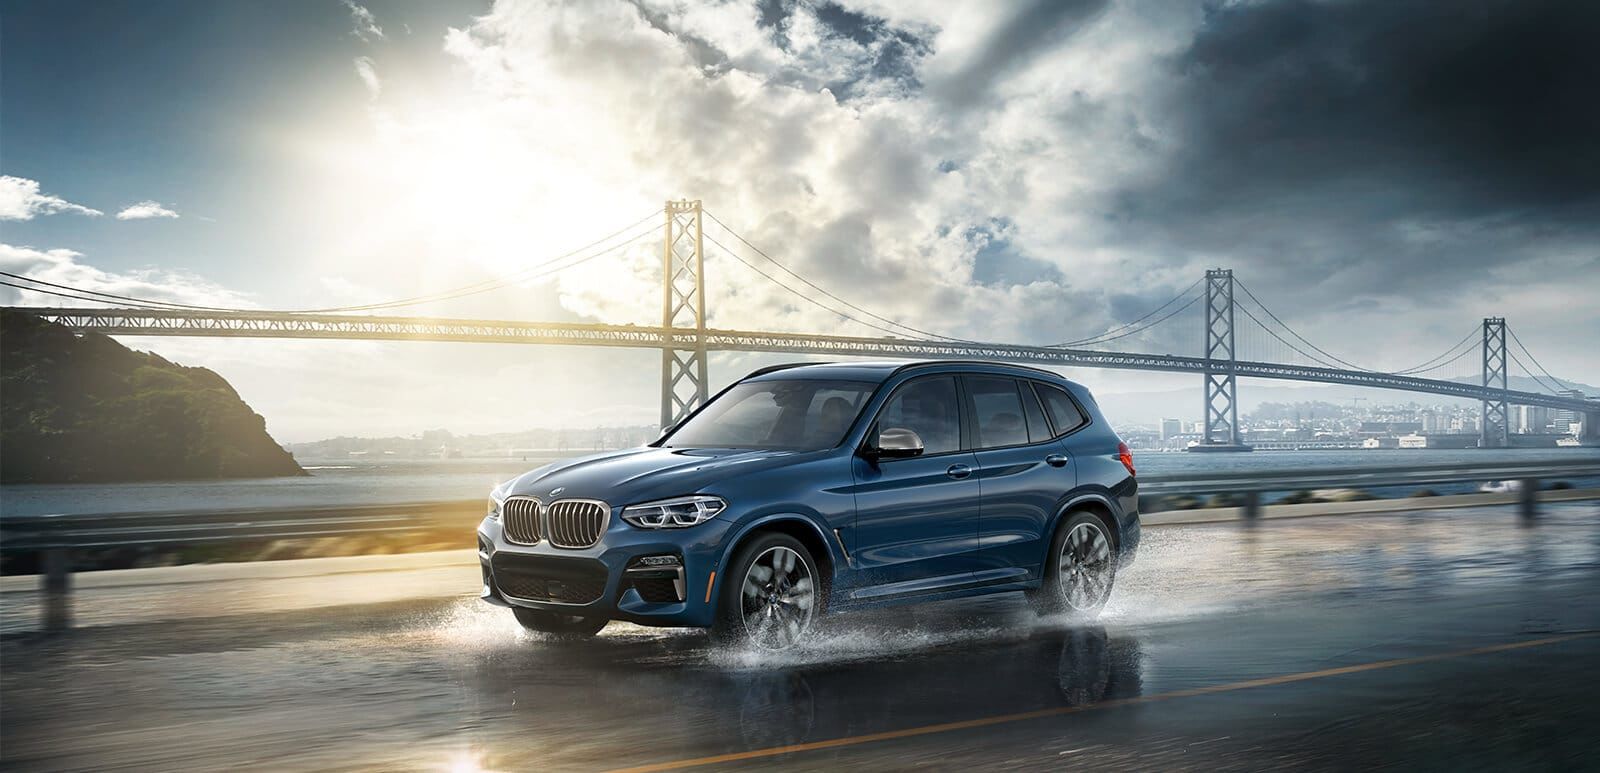 The 2019 BMW X3: When You Need the Best Without Compromise